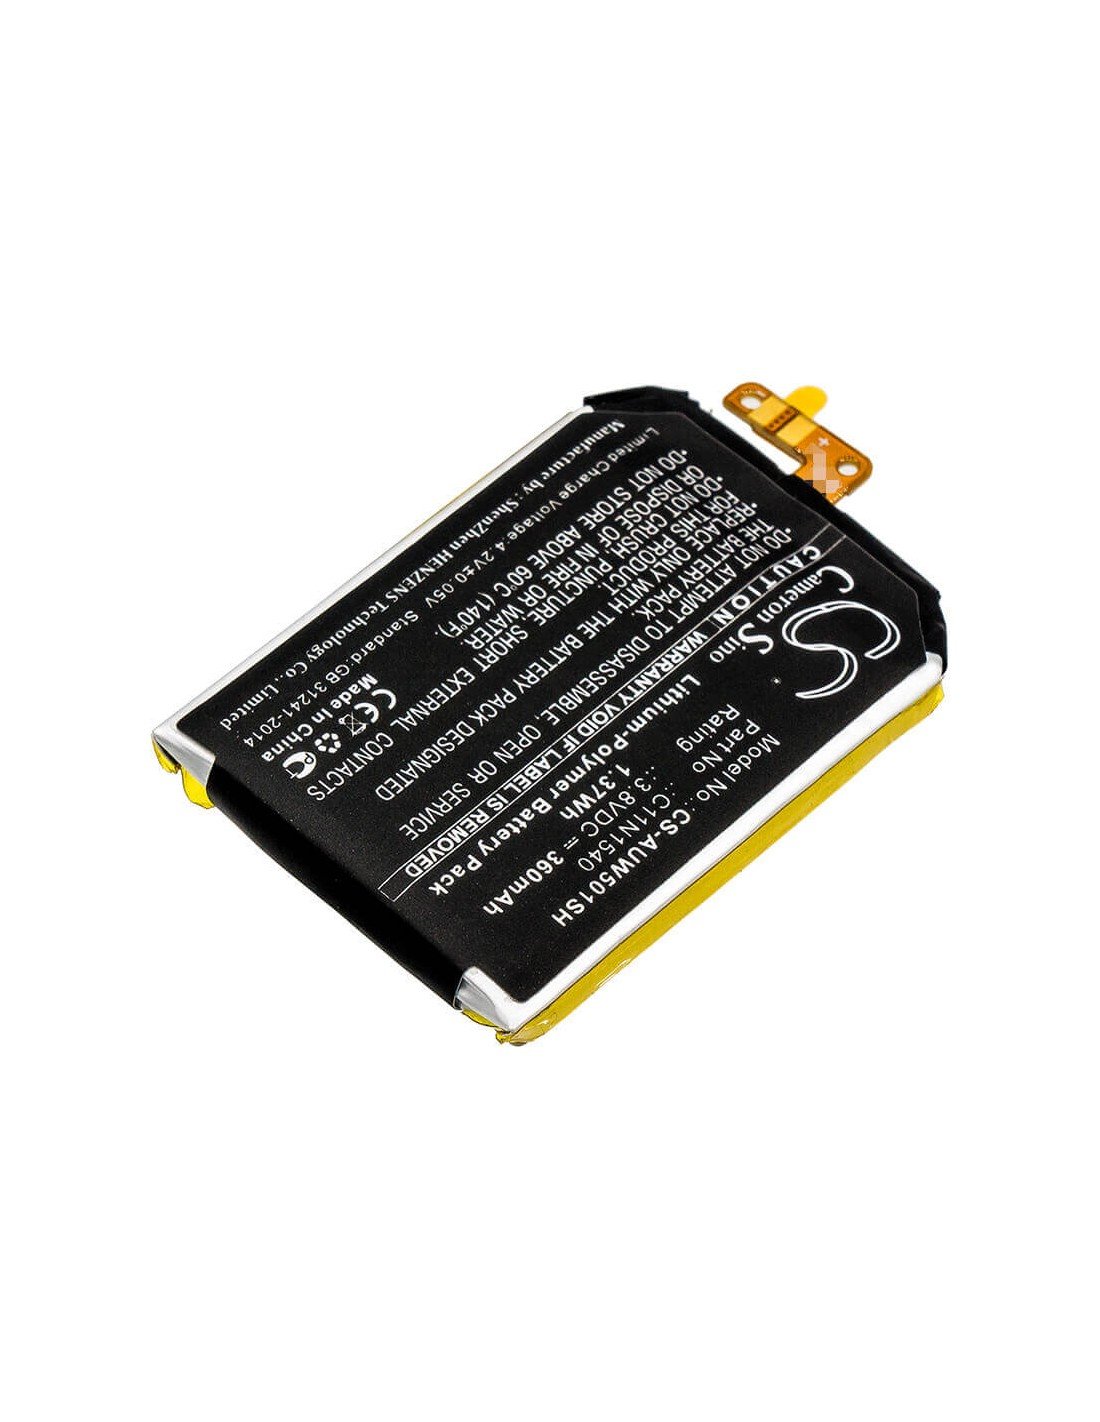 Battery for Asus, Wi501q, Wi501qf, Zenwatch 2 Wi501qf 3.8V, 360mAh - 1.37Wh